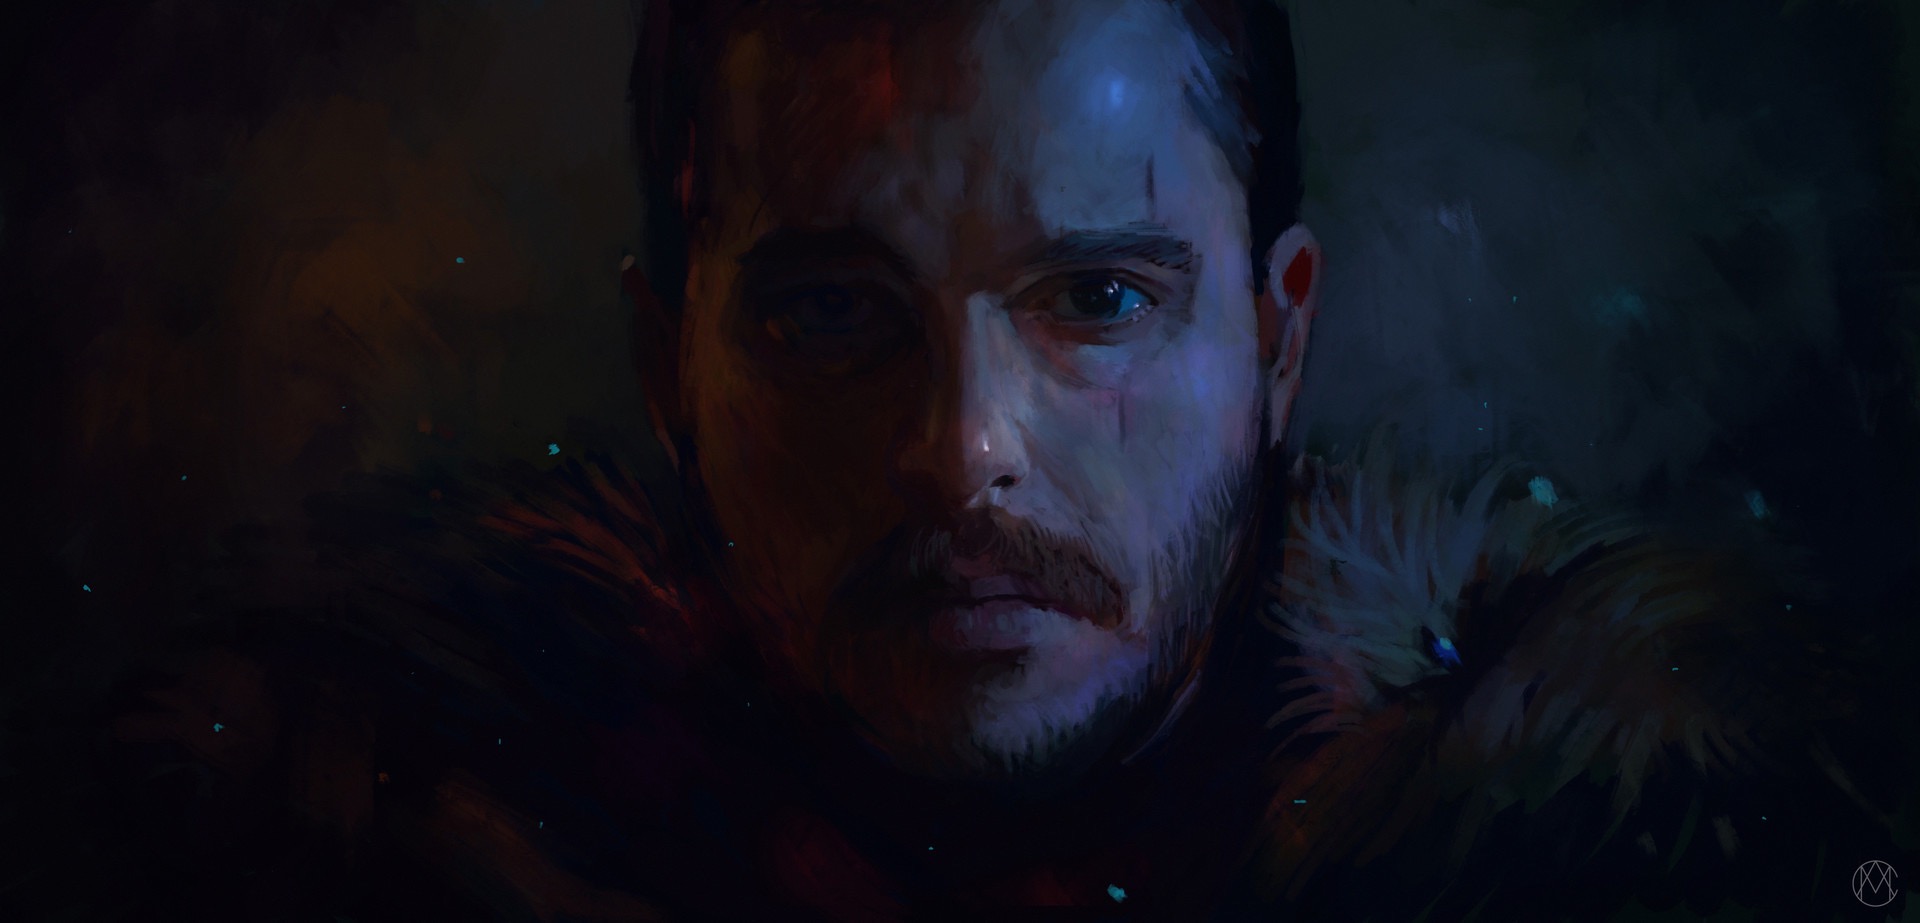 A Song Of Ice And Fire Jon Snow Aegon Targaryen Game Of Thrones Portrait Painting 1920x923